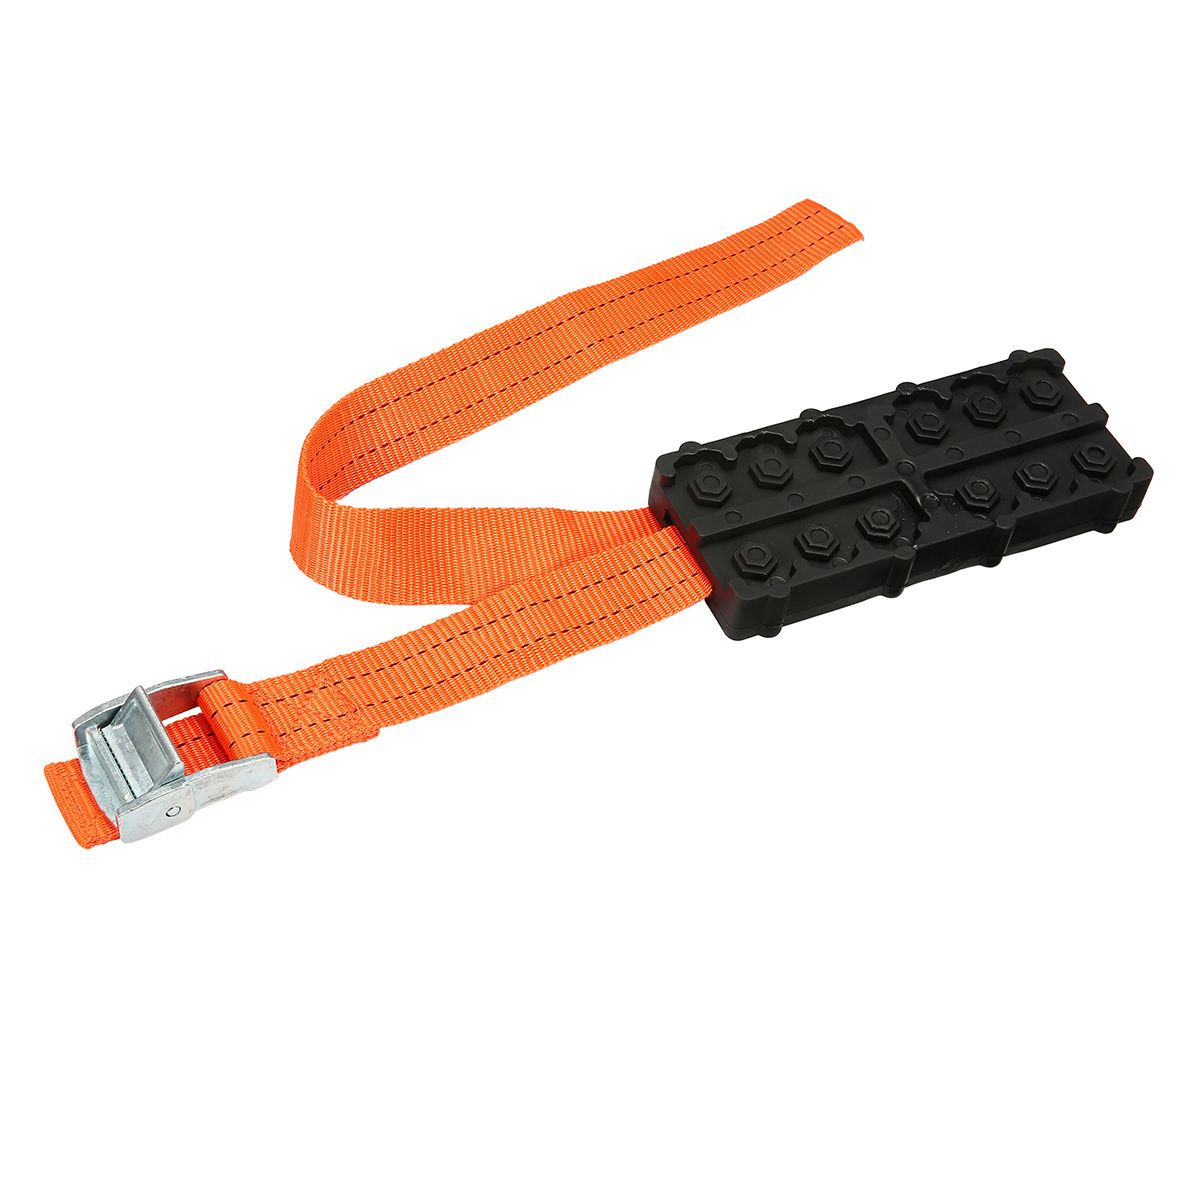 Rubber-Winter-Emergency-Car-Snow-Chain-Truck-SUV-Wheel-Tire-Anti-skid-Block-Safety-Driving-for-Mud-S-1395414